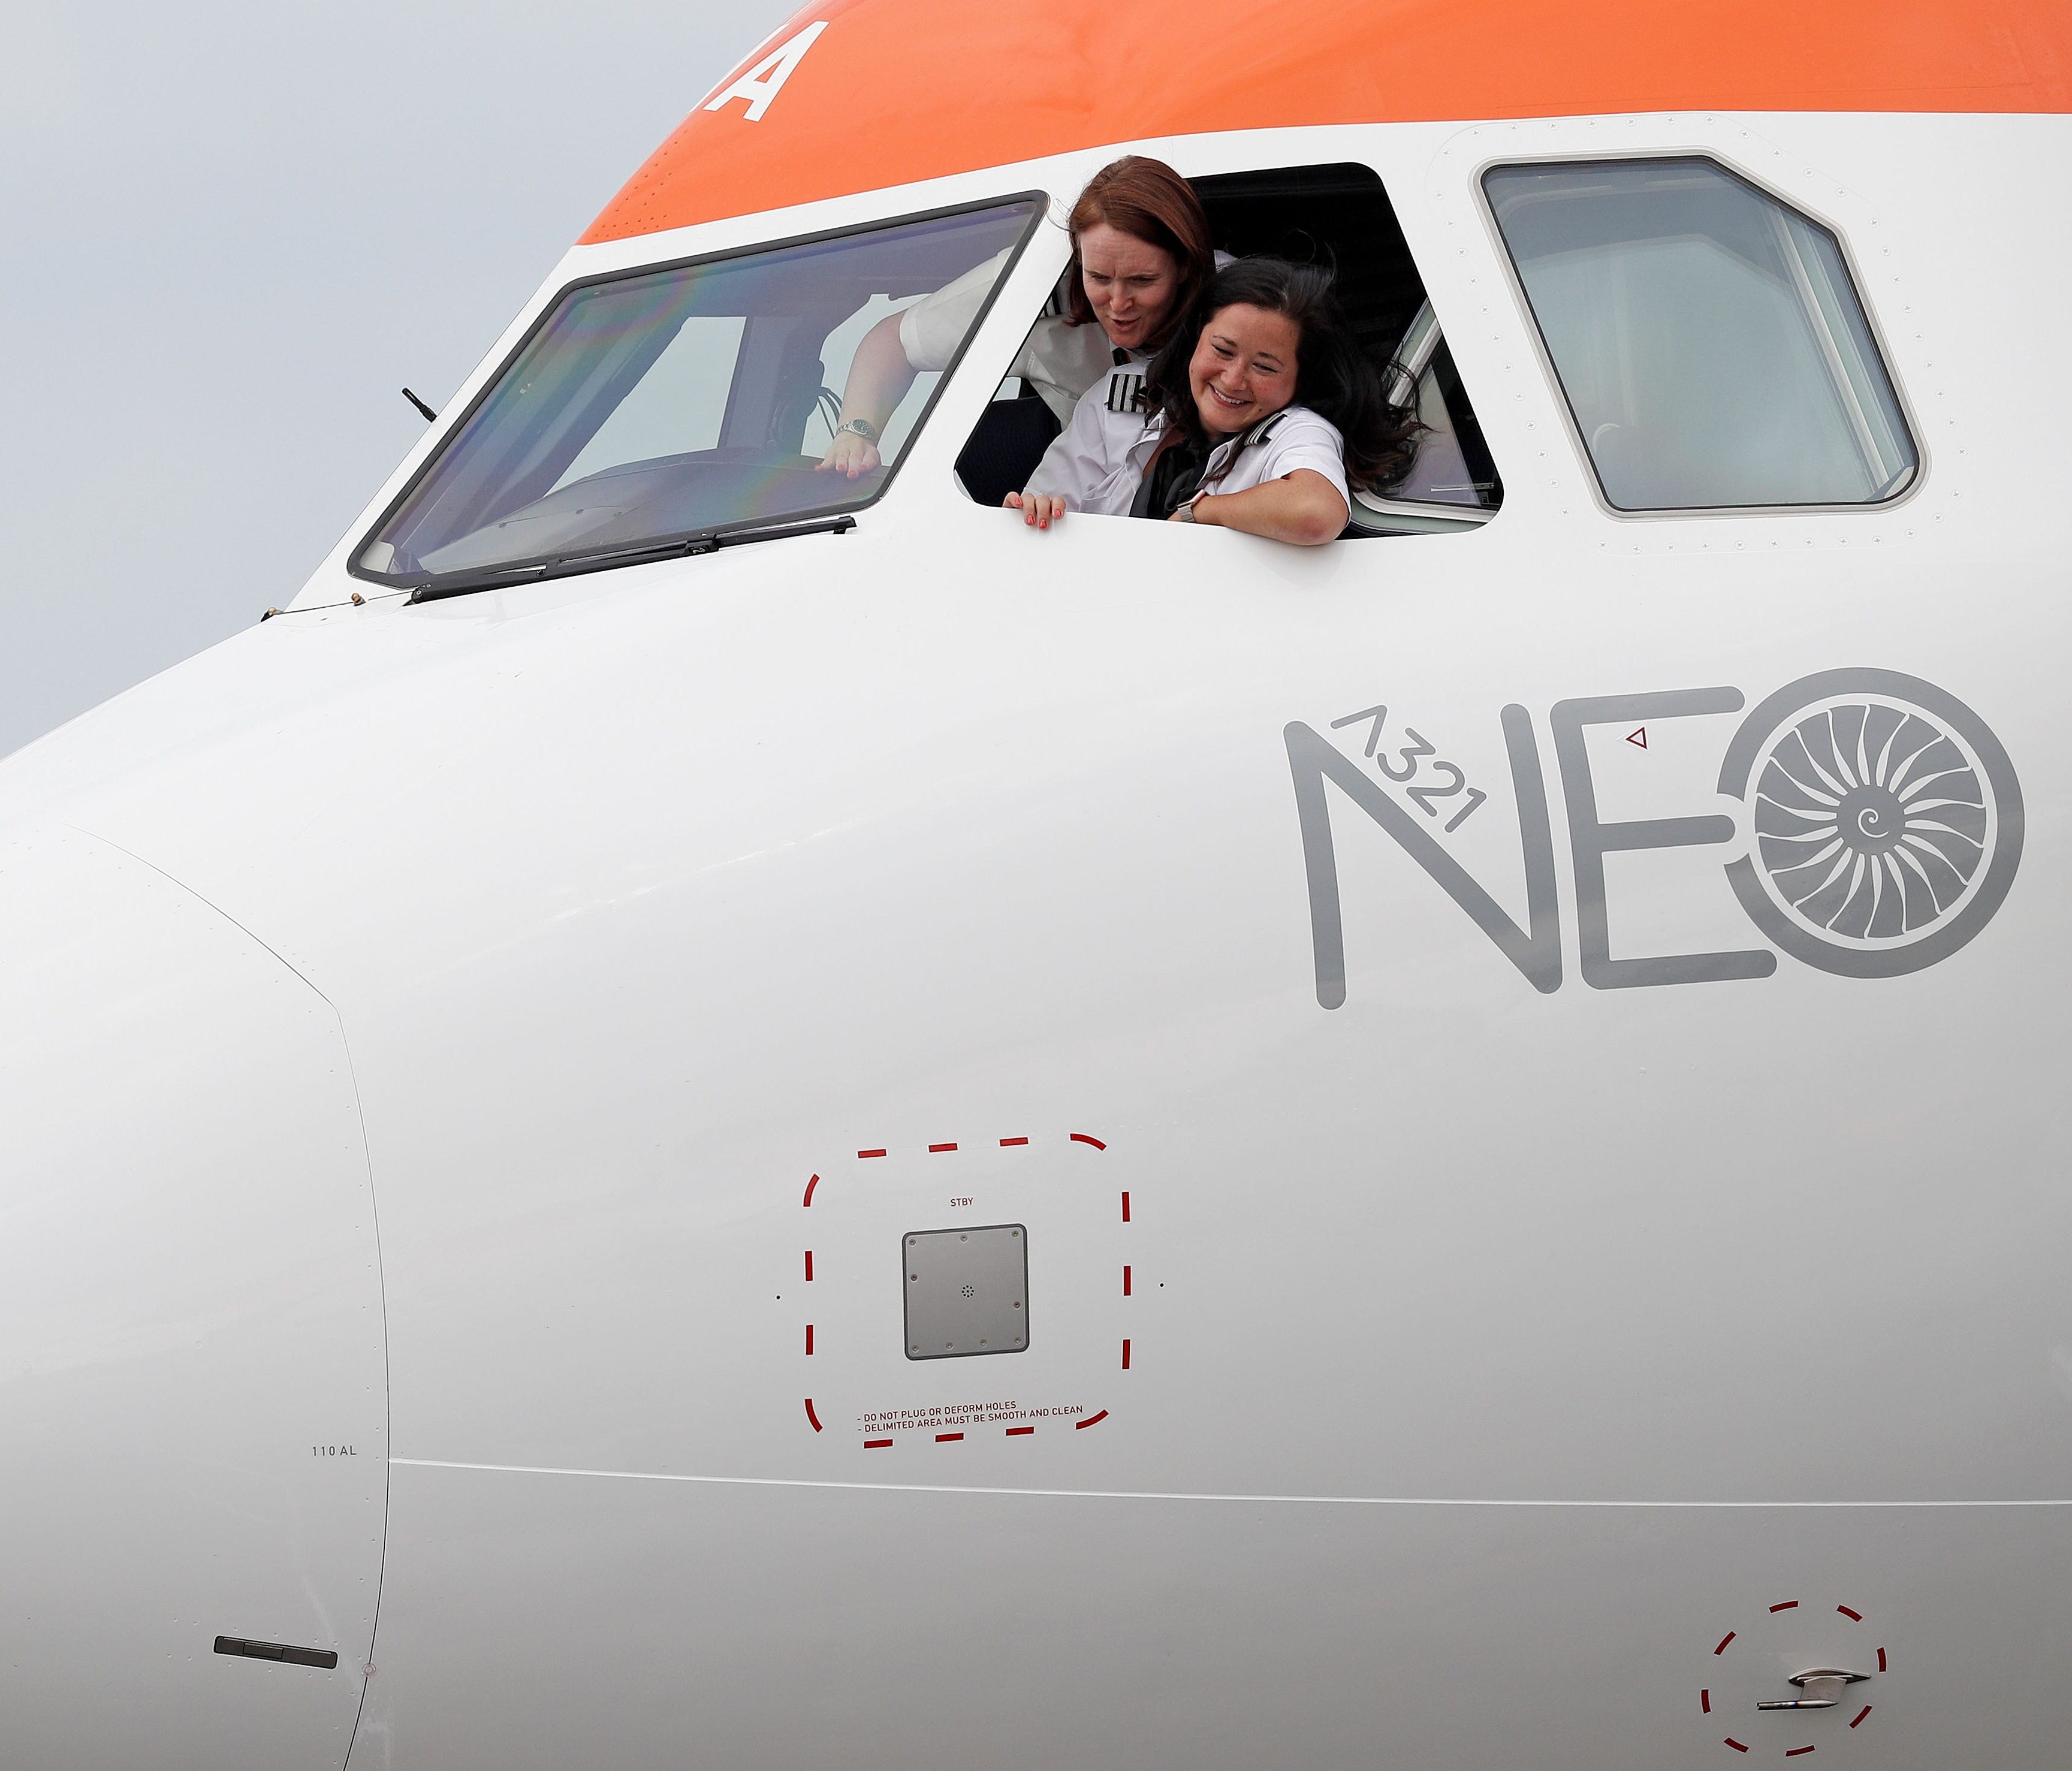 EasyJet pilots pose from the cockpit of the carrier's new Airbus A321neo aircraft at the Farnborough Airshow on July 18, 2018.